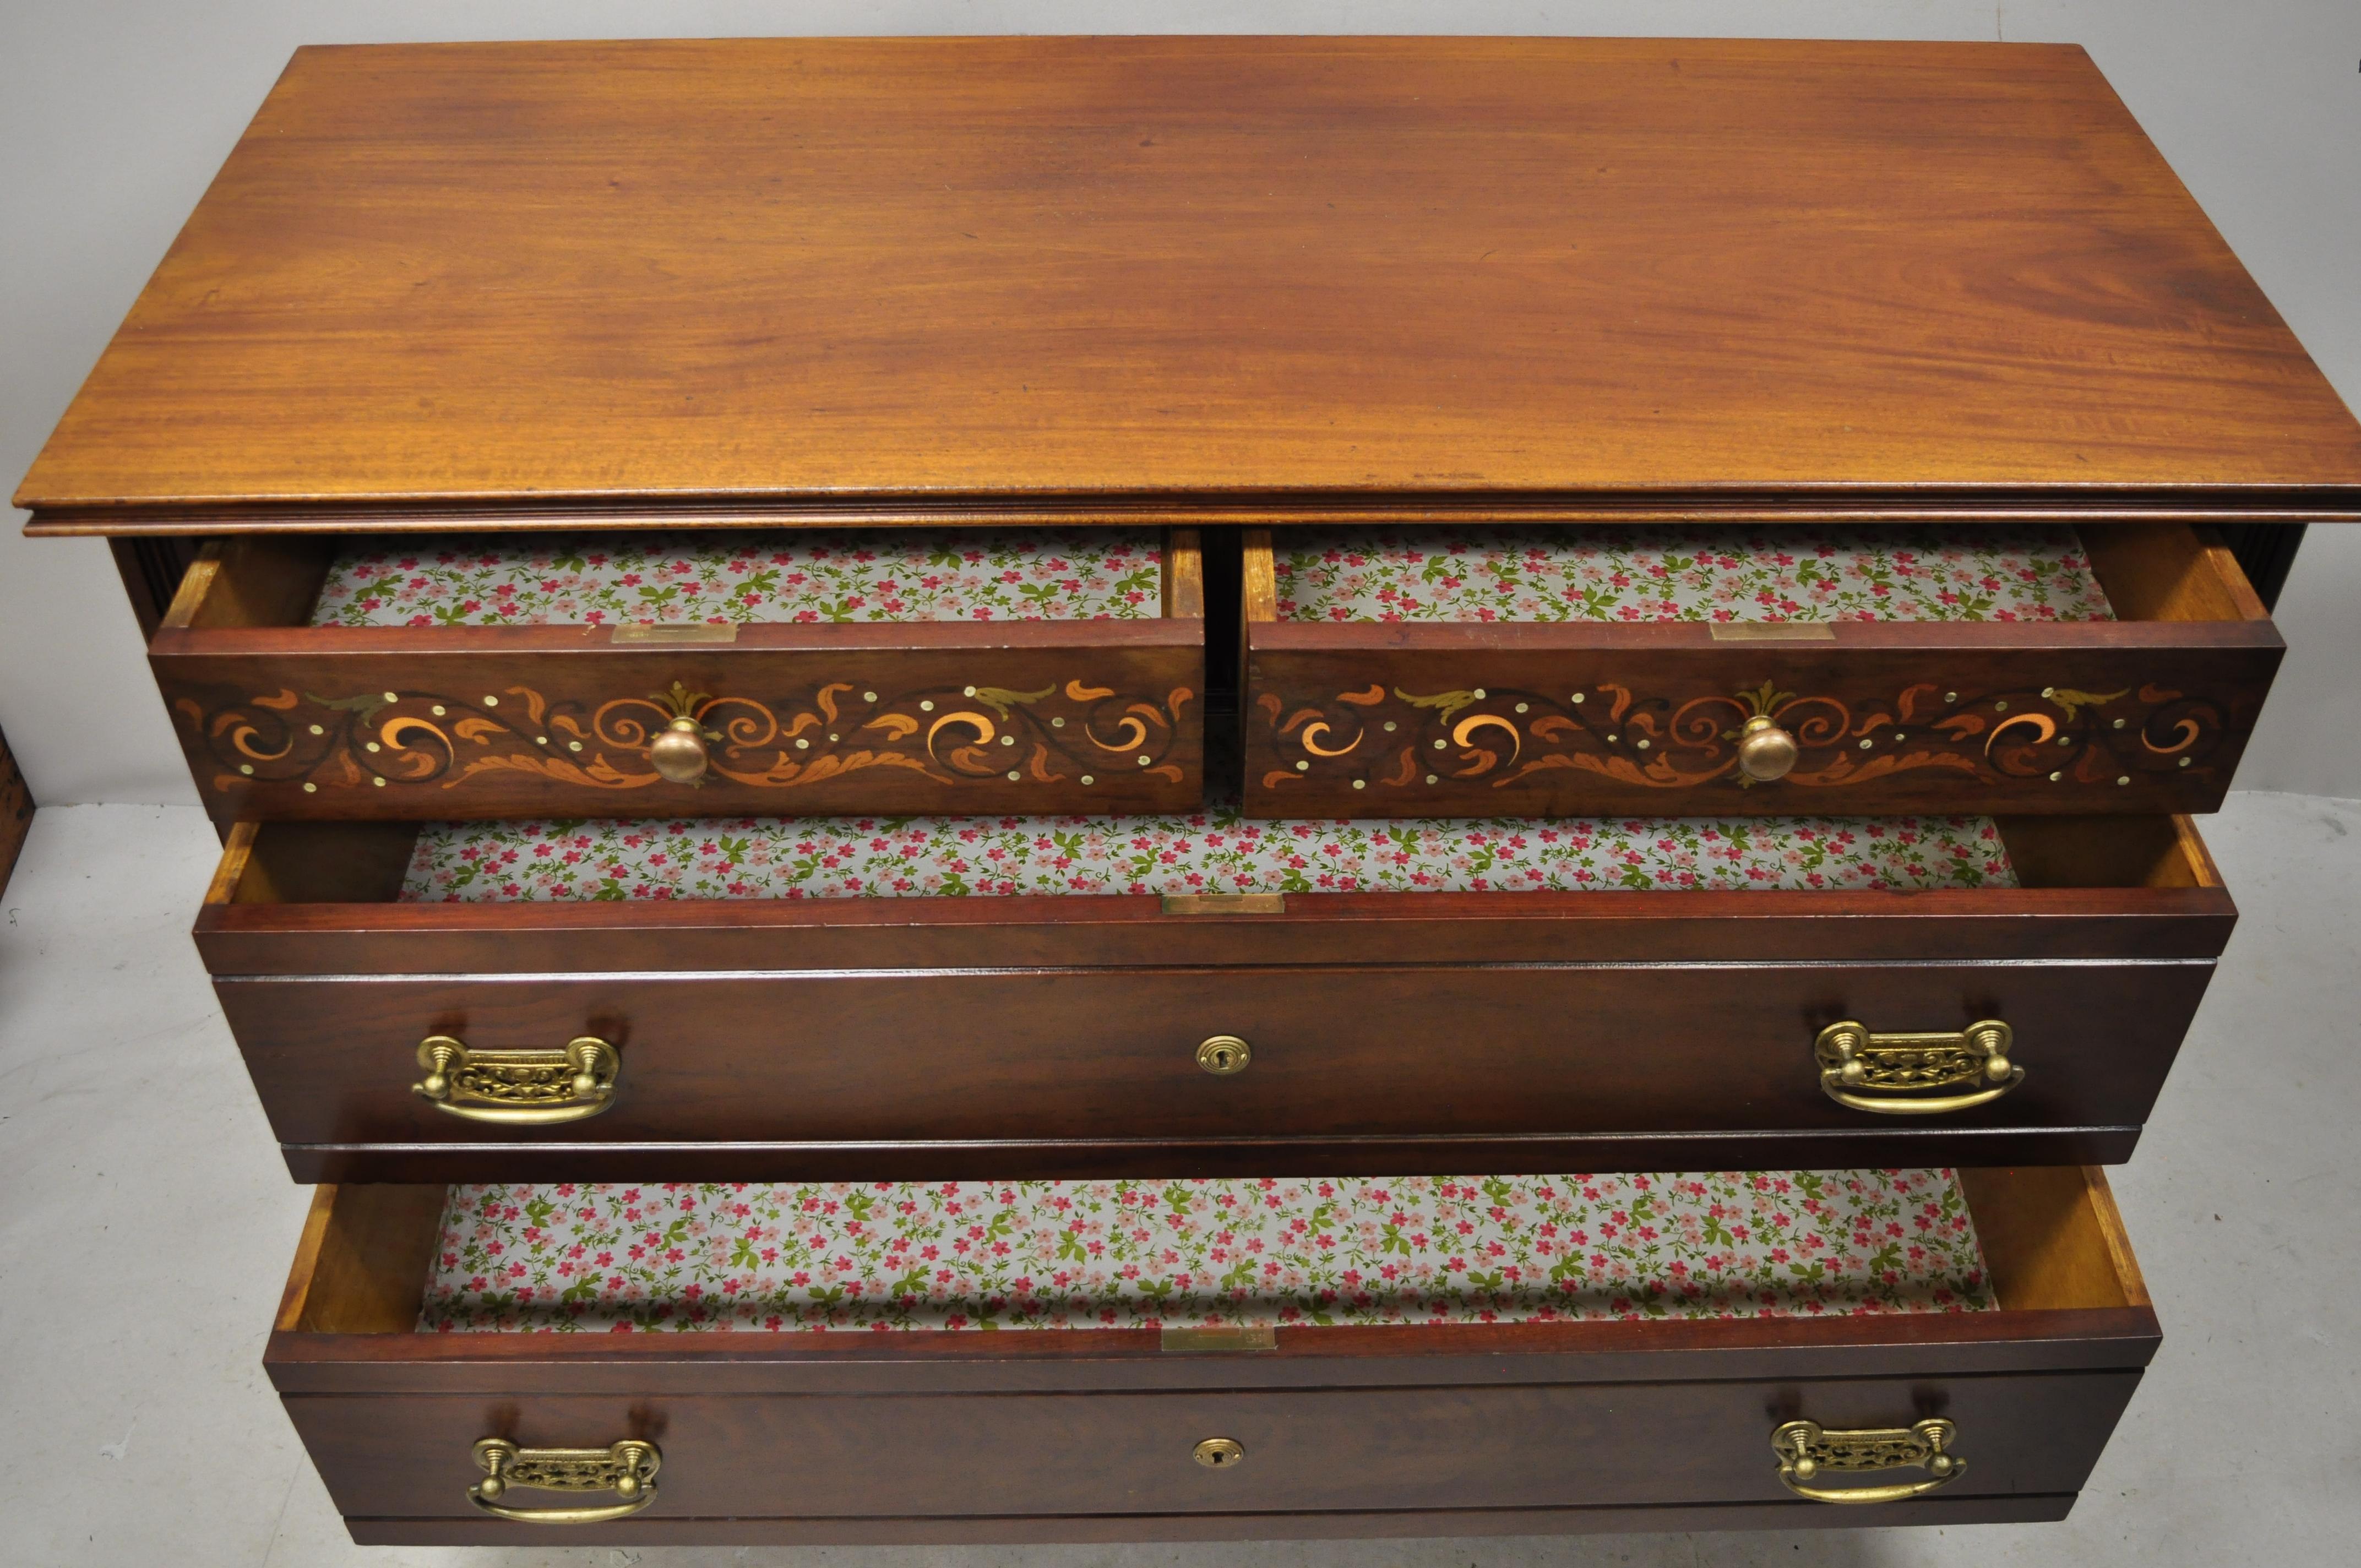 North American Antique Herts Brothers Edwardian Bronze & Satinwood Inlay Mahogany Chest Dresser For Sale